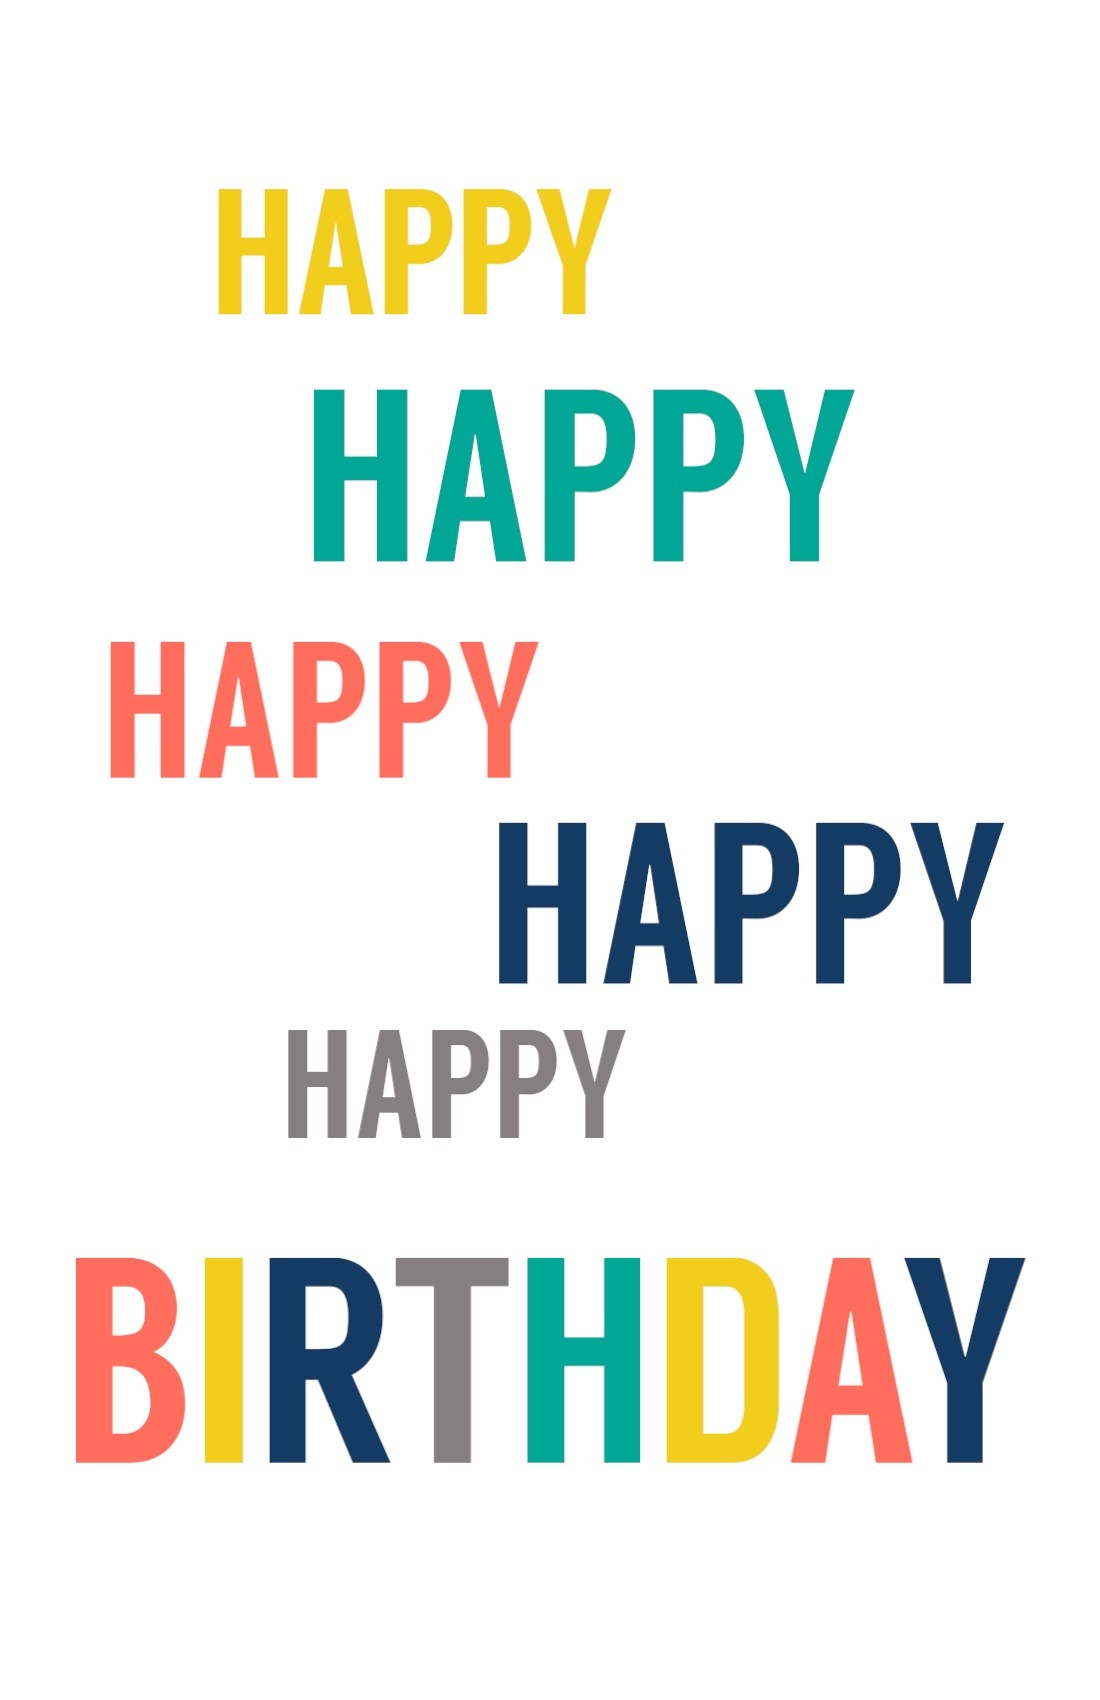 Free Printable Birthday Cards - Paper Trail Design - Free Printable Funny Birthday Cards For Adults